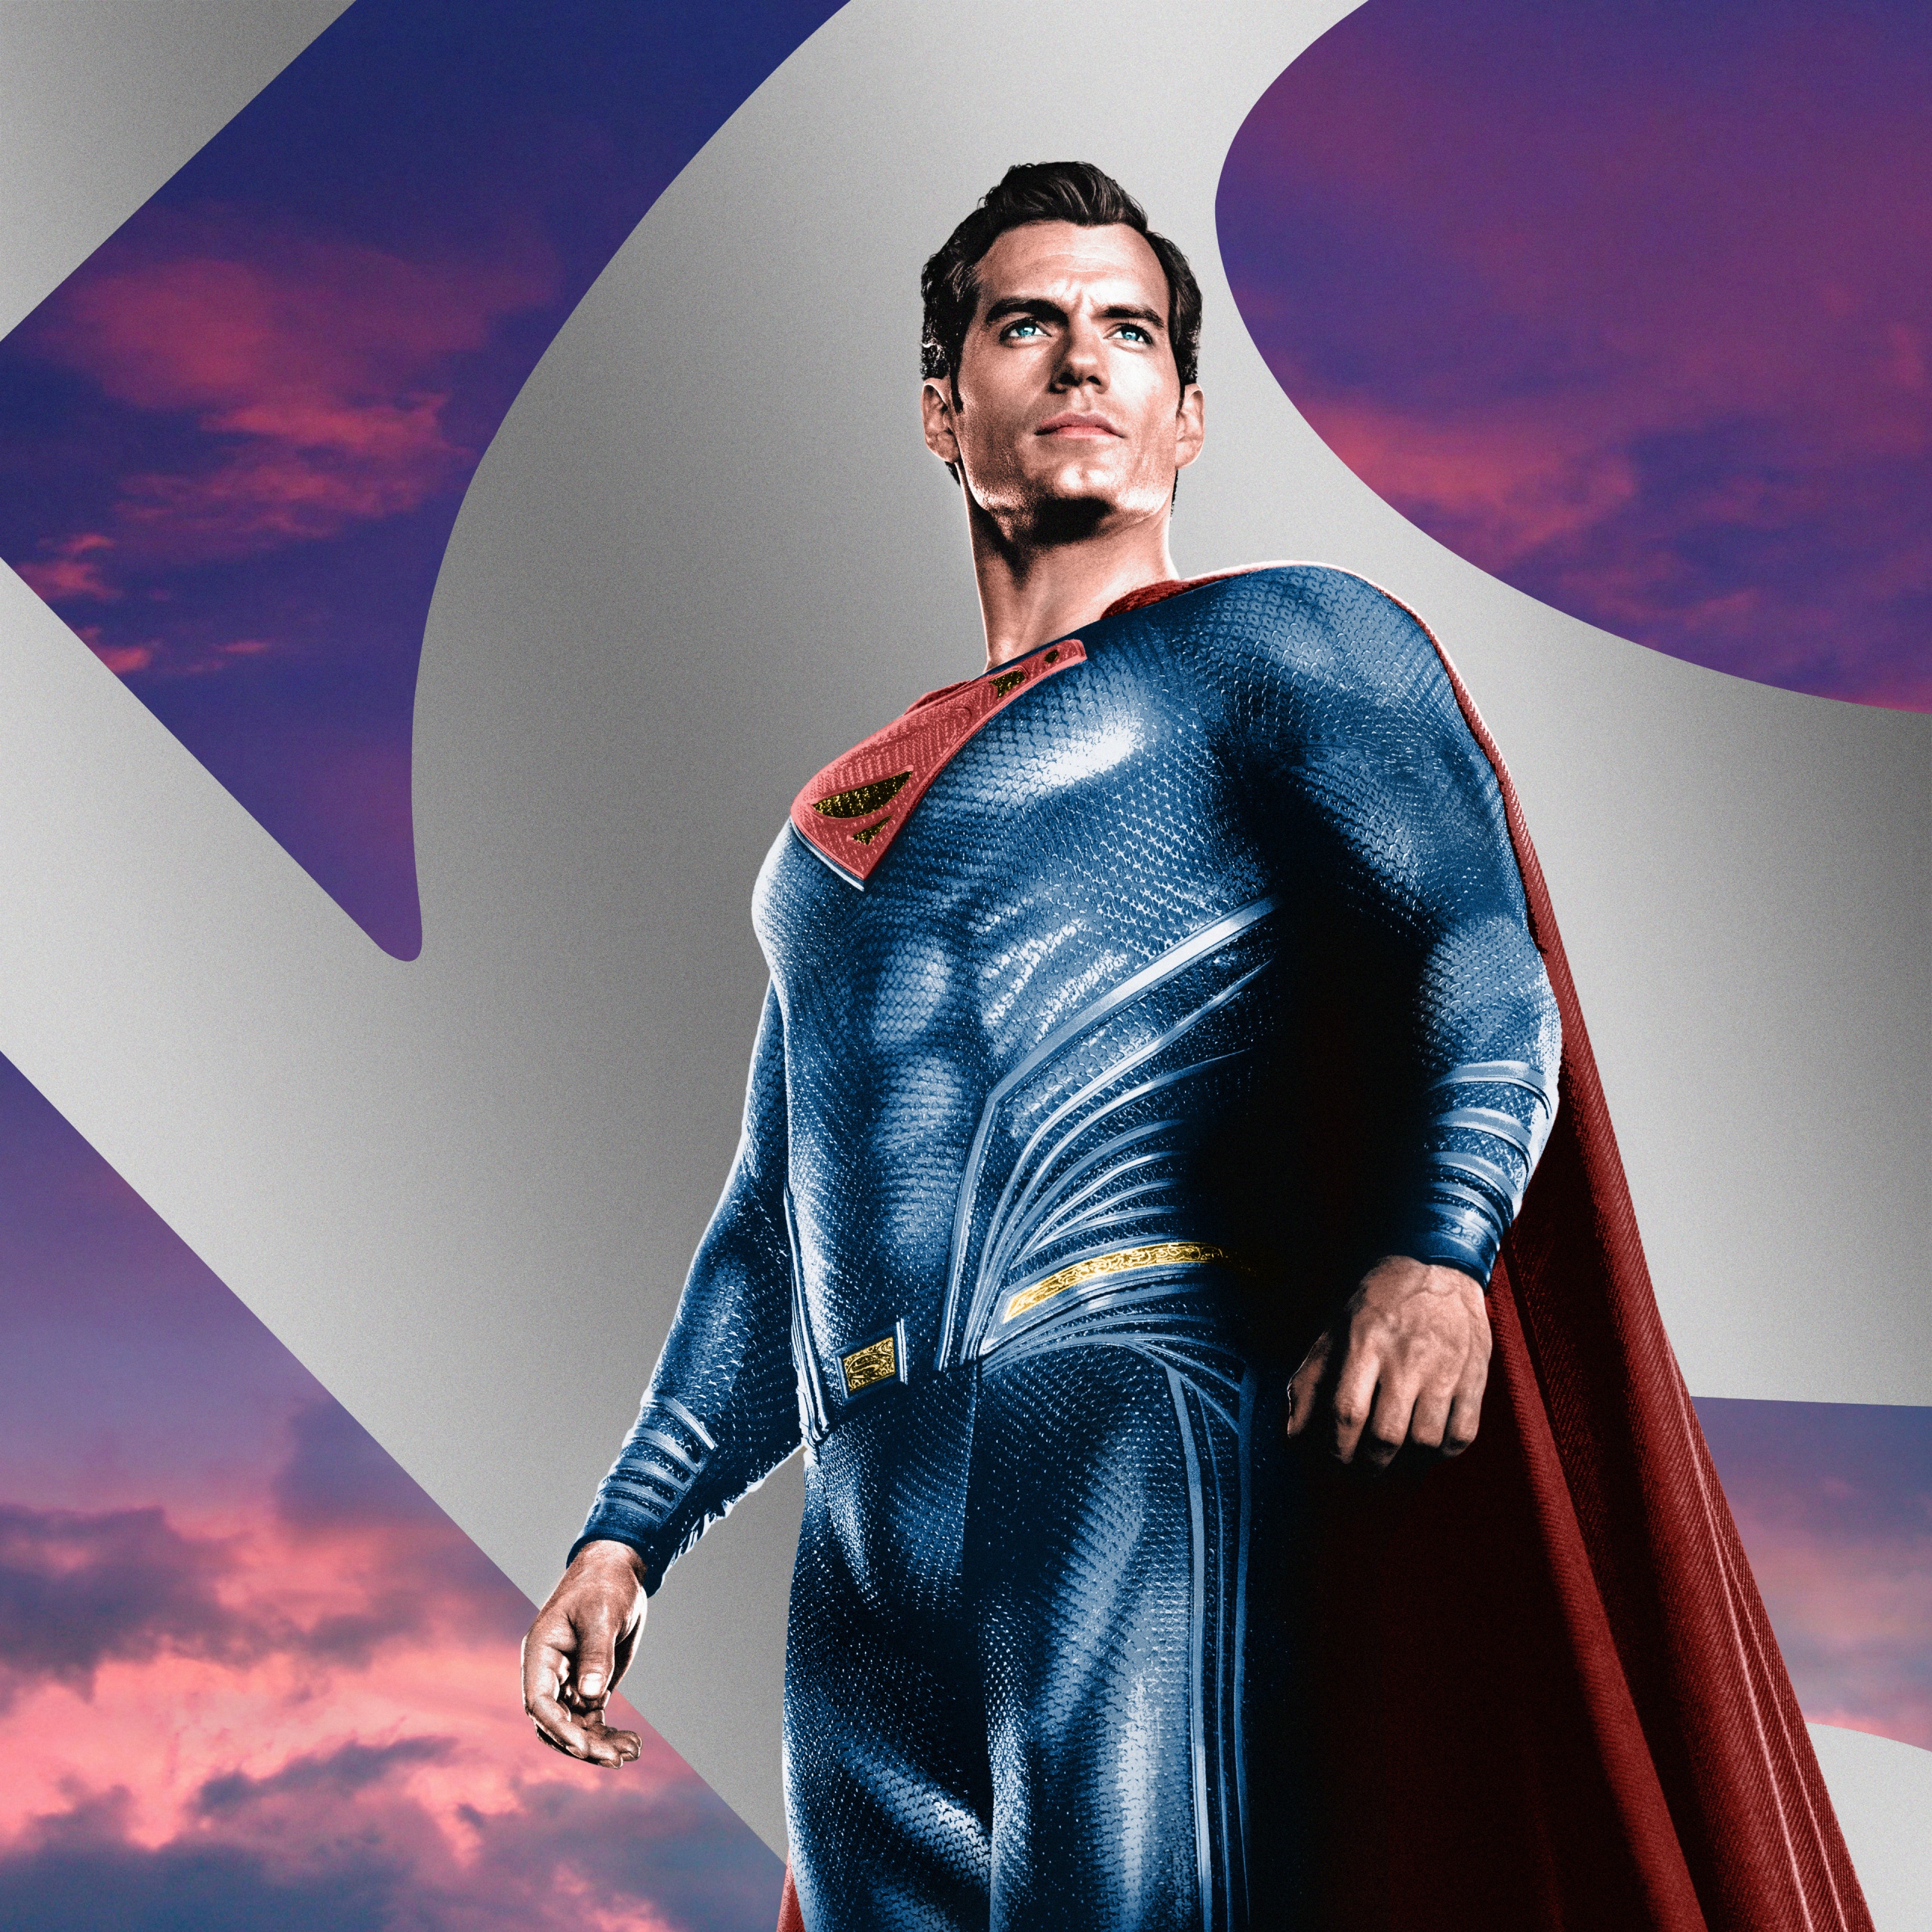 2160x3840 Henry Cavill Superman Sony Xperia X,XZ,Z5 Premium ,HD 4k  Wallpapers,Images,Backgrounds,Photos and Pictures